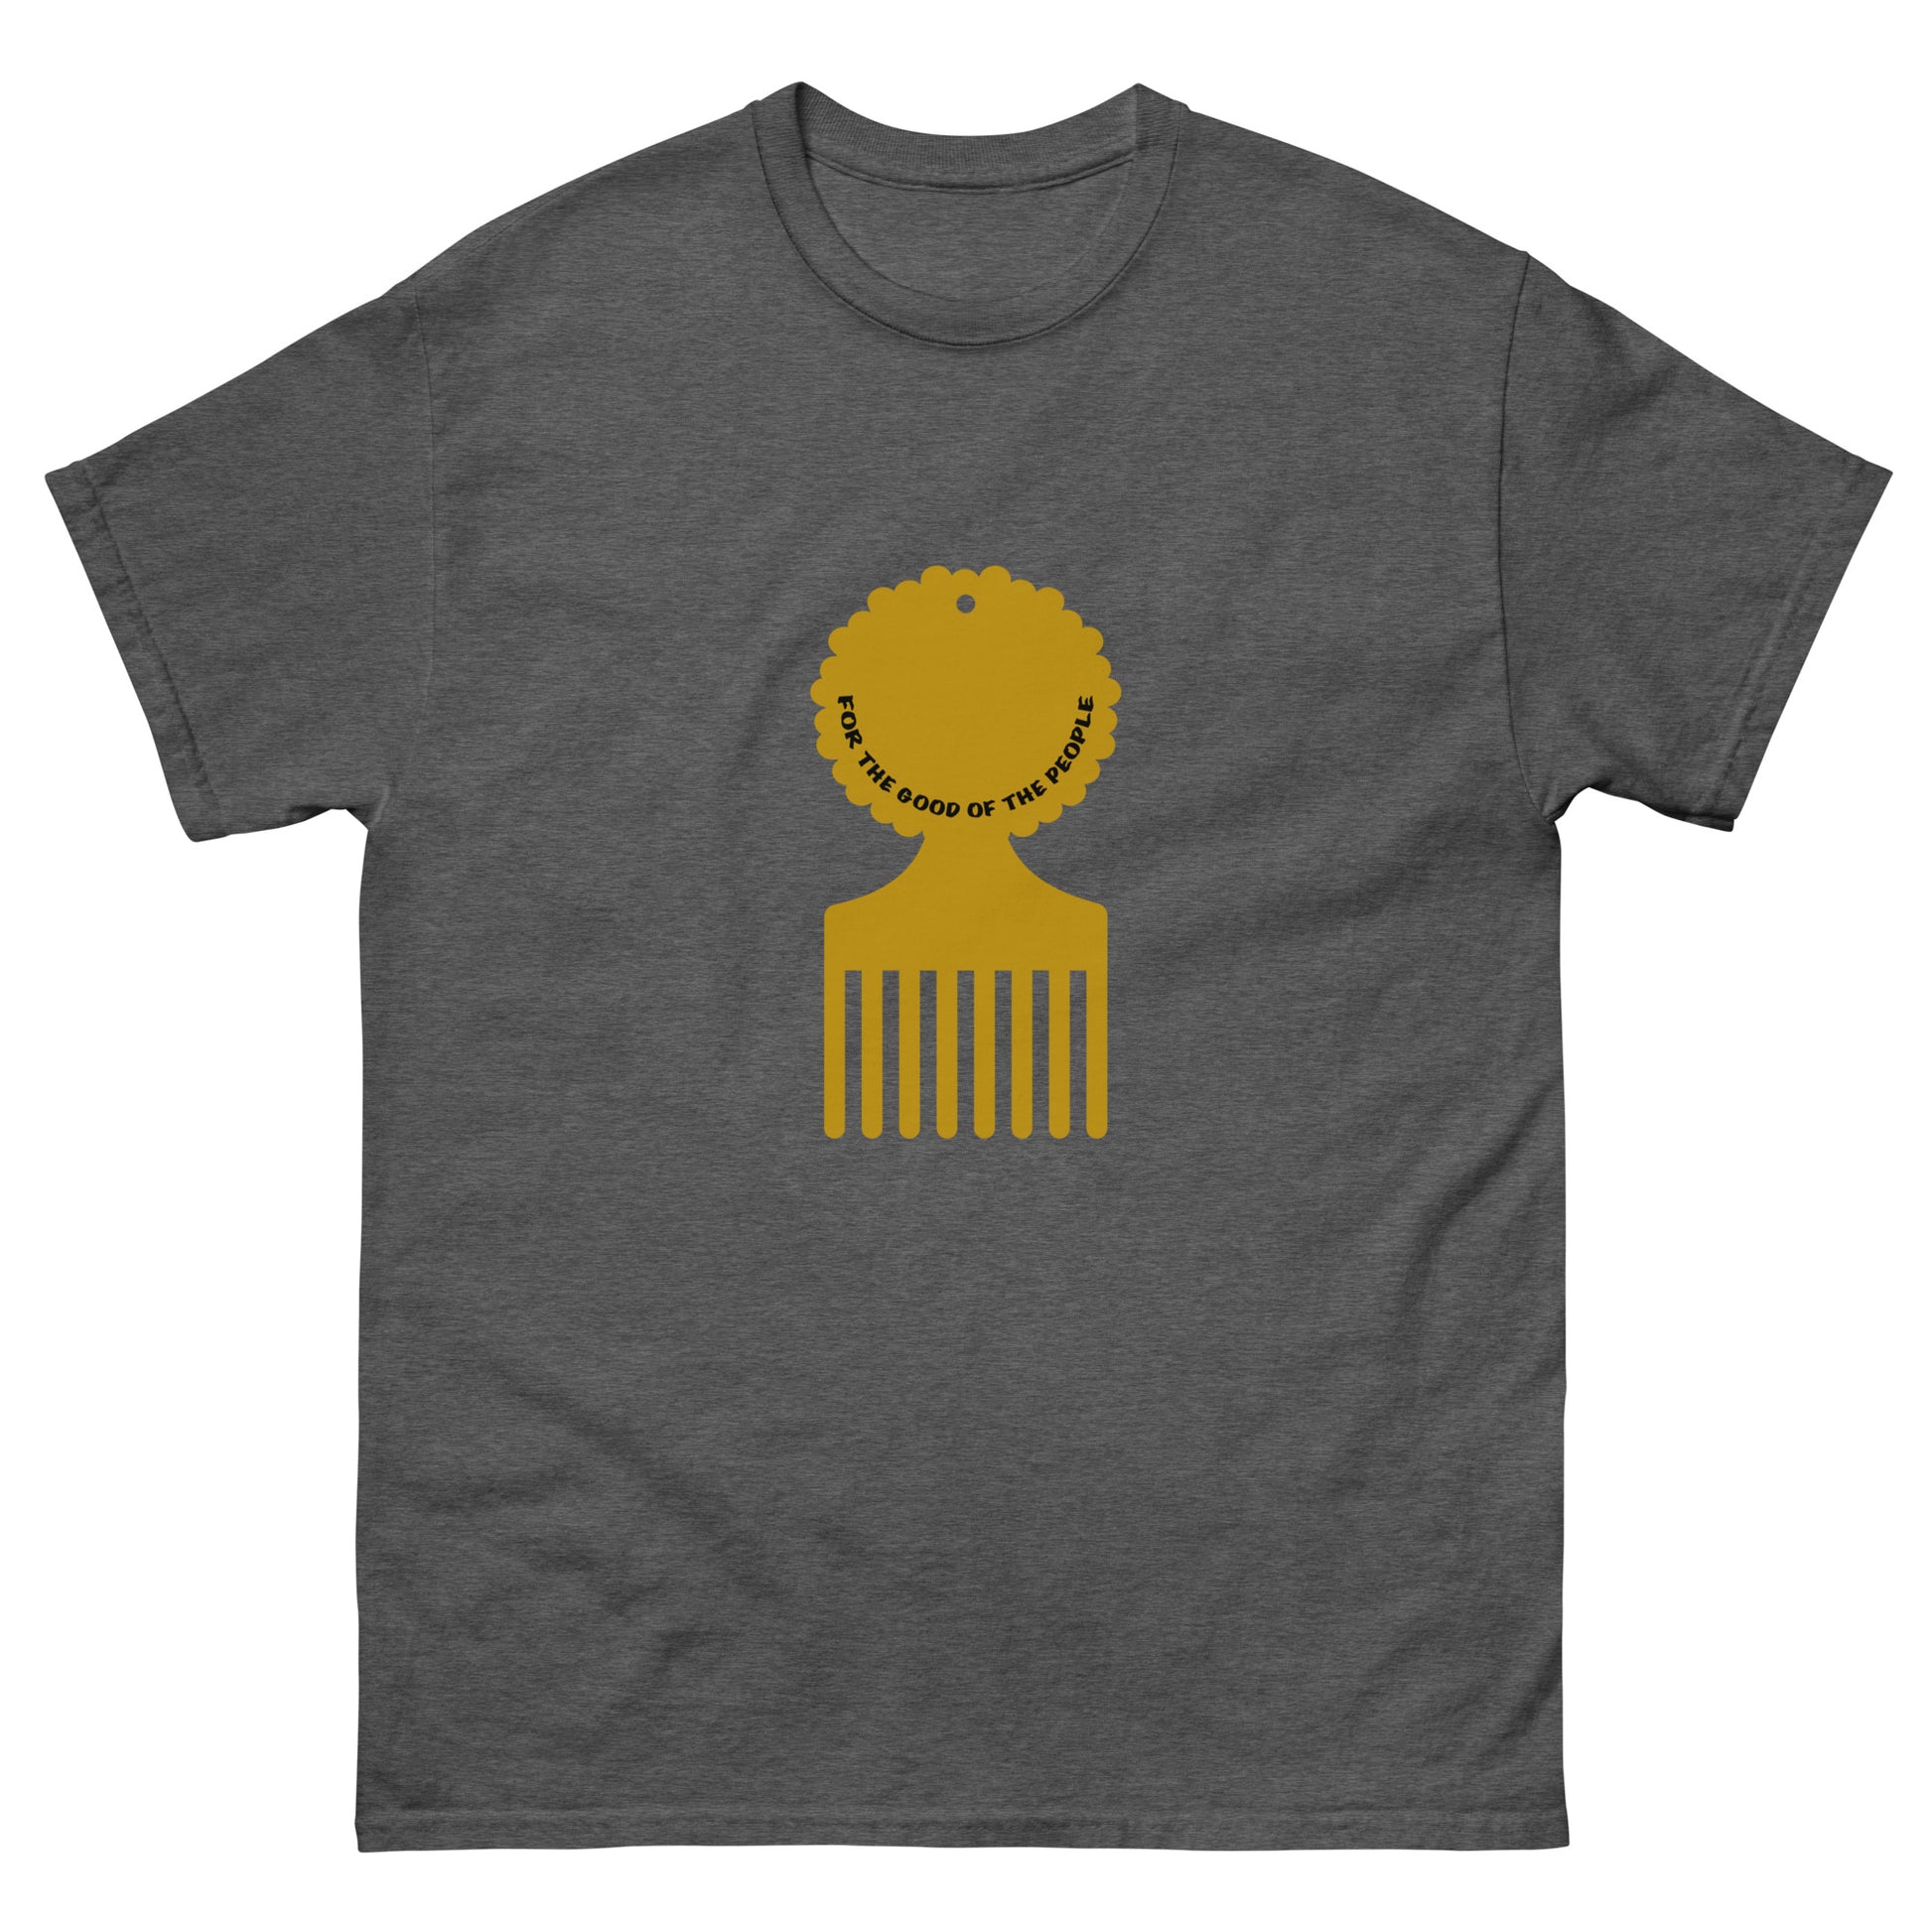 Men's dark heather gray tee with gold afro pick in the center of shirt, with for the good of the people in black inside the afro pick's handle.